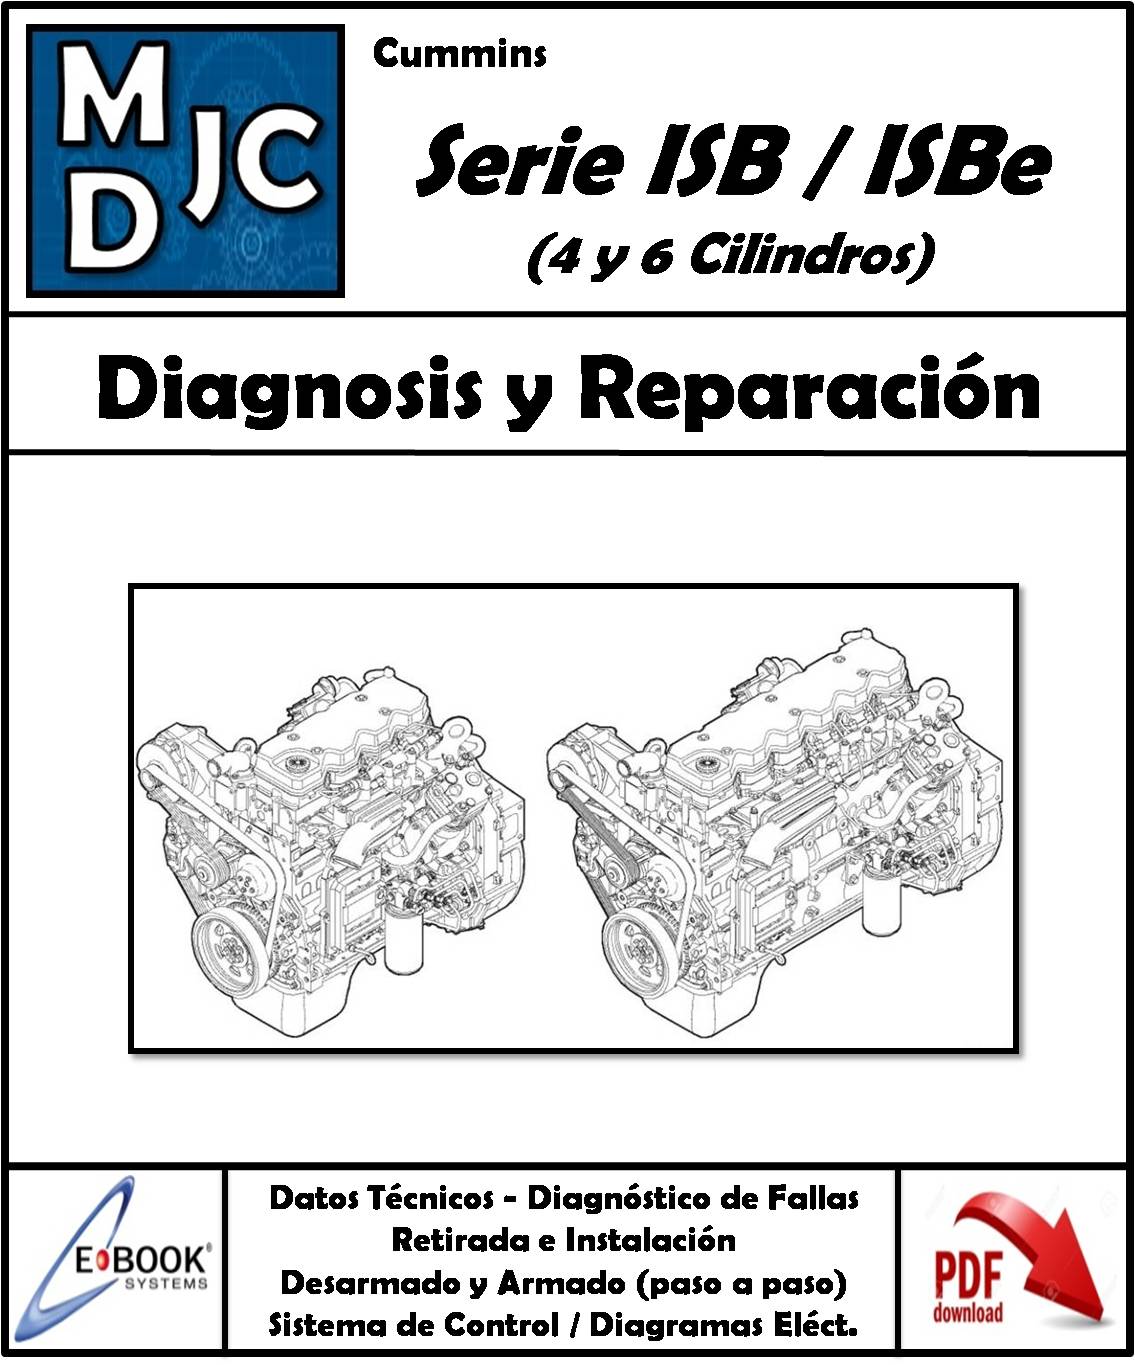 Cummins  ISB / ISBe  //  Motores Serie ISB (4 cilindros) e ISBe (4 y 6 cilindros)